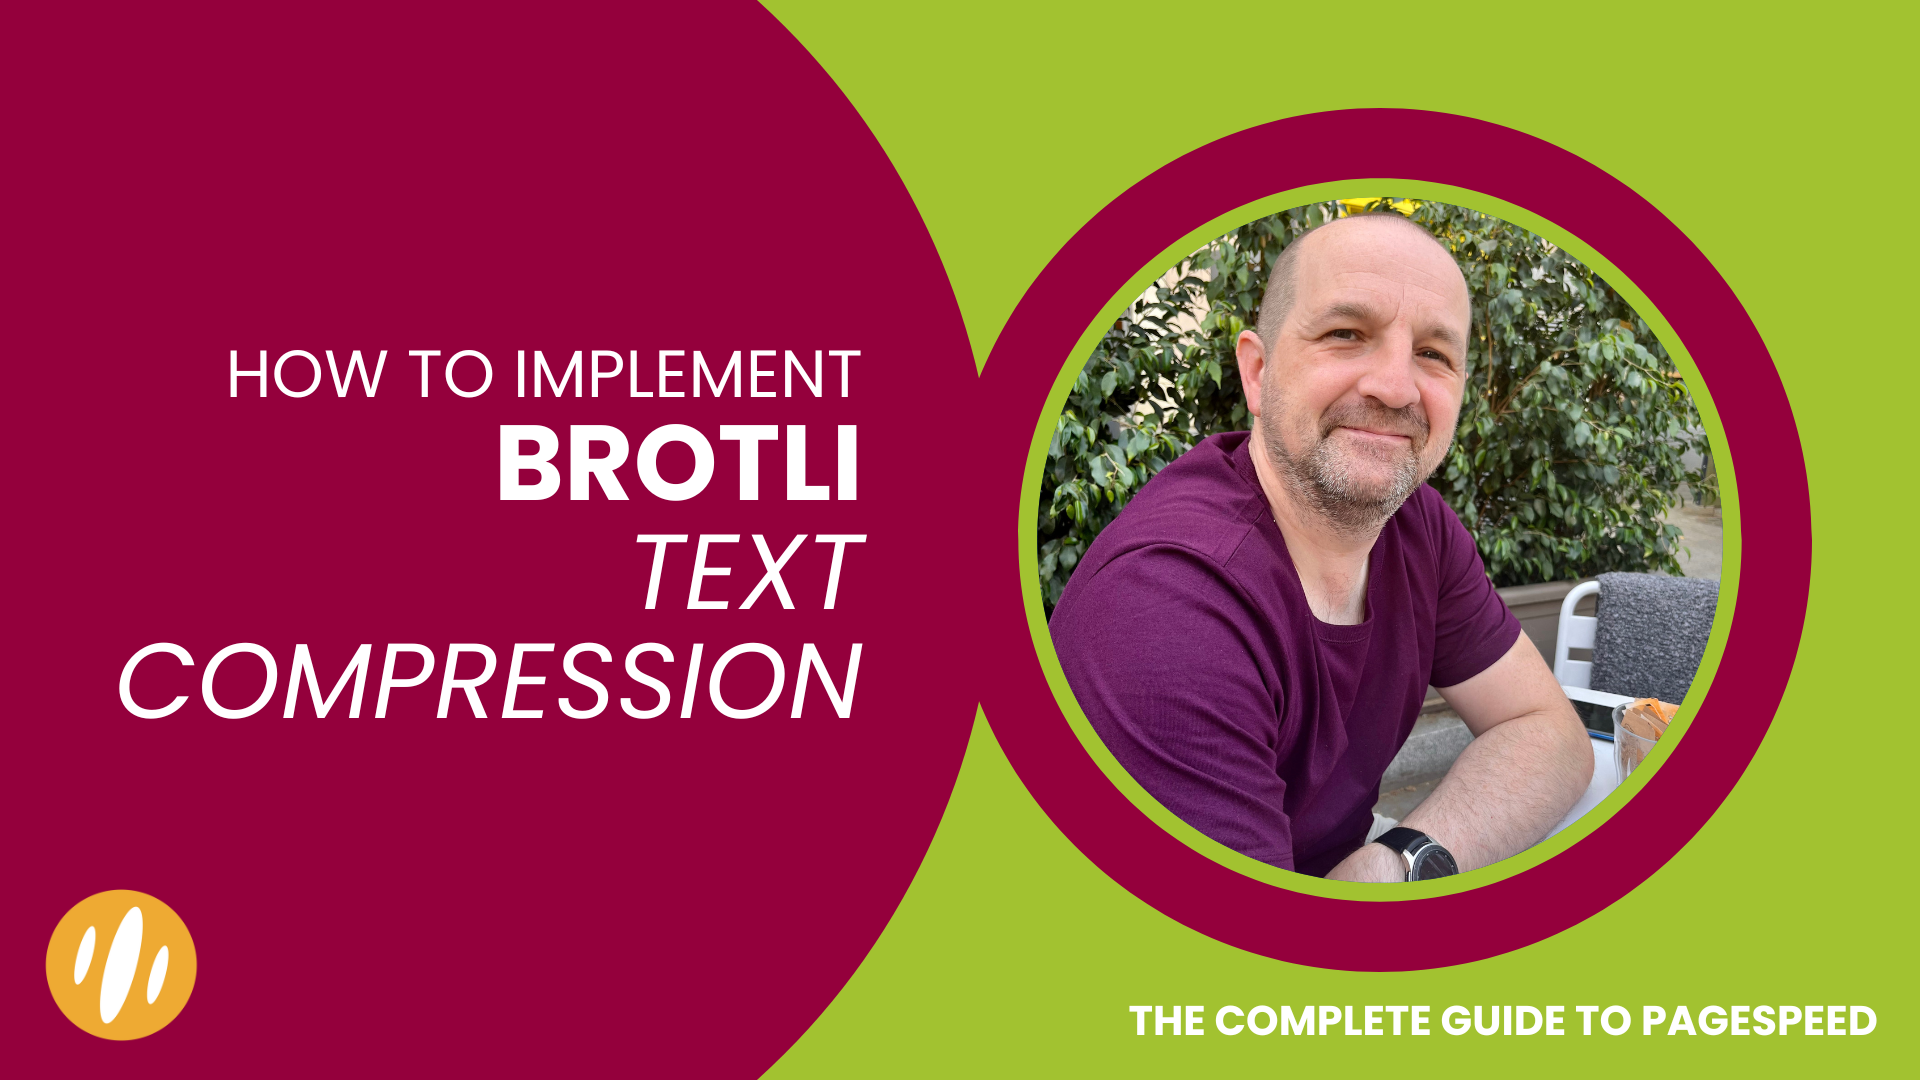 How to Implement Brotli Text Compression